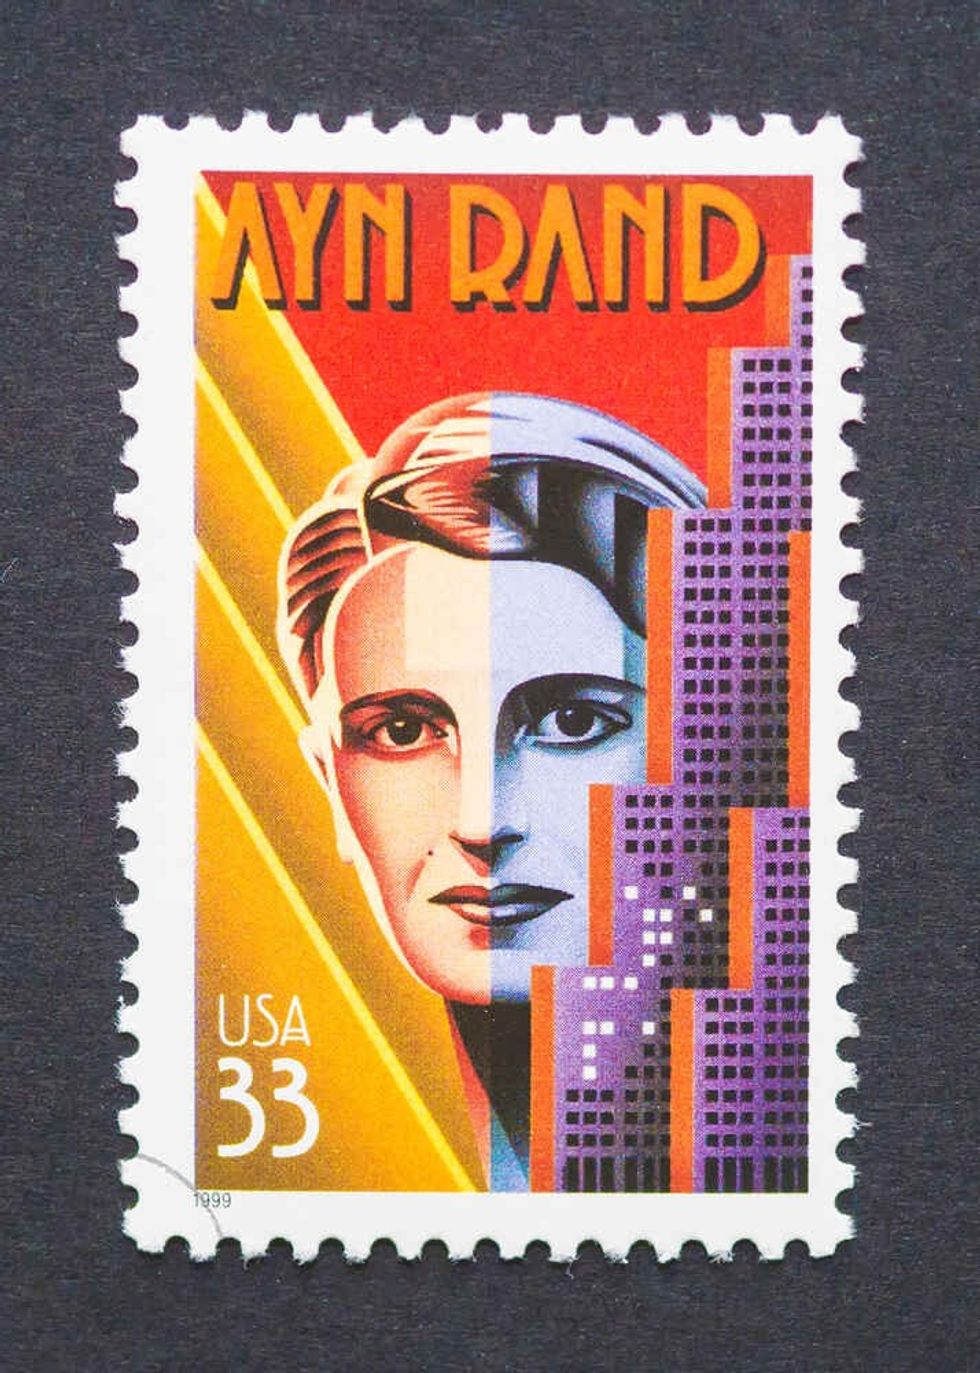 a postage stamp printed in USA showing an image of Ayn Rand